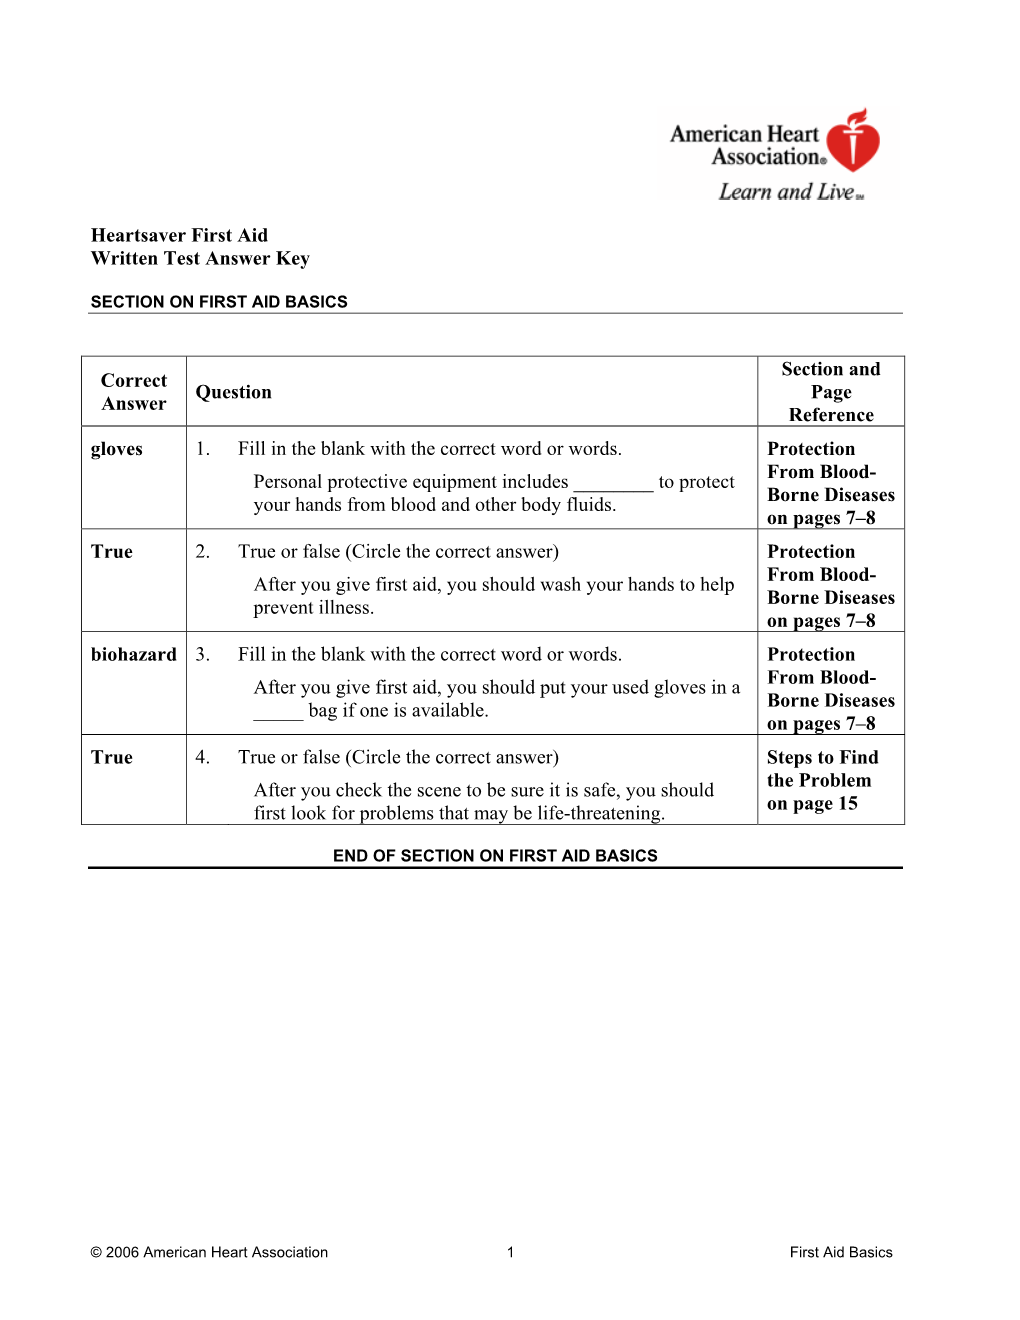 Heartsaver First Aid Written Test Answer Key Correct Answer